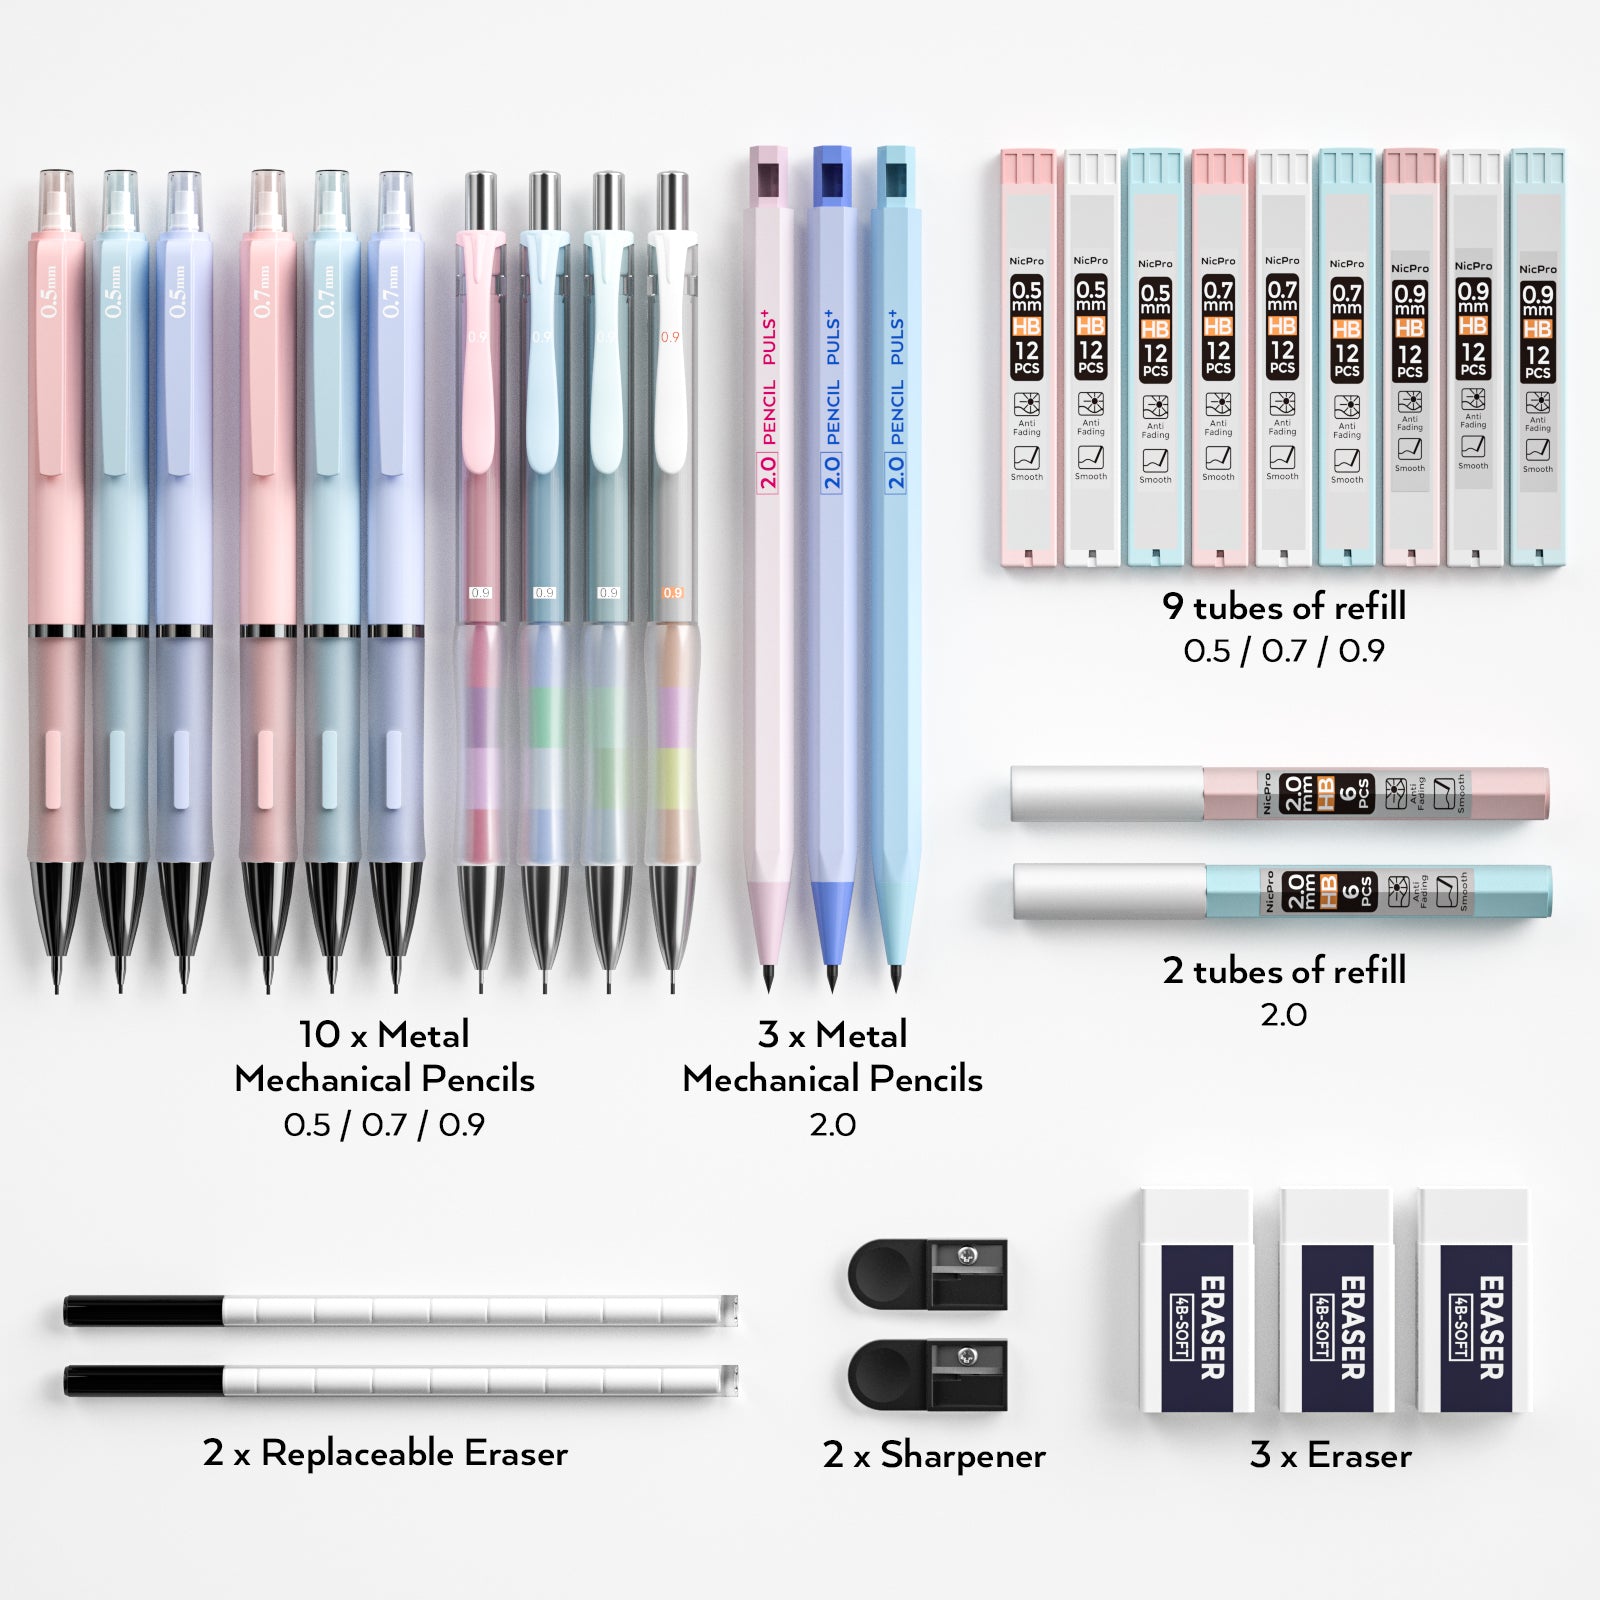 Nicpro 10 Pack 0.5 mm Mechanical Pencil Bulk Set with Case, Cute